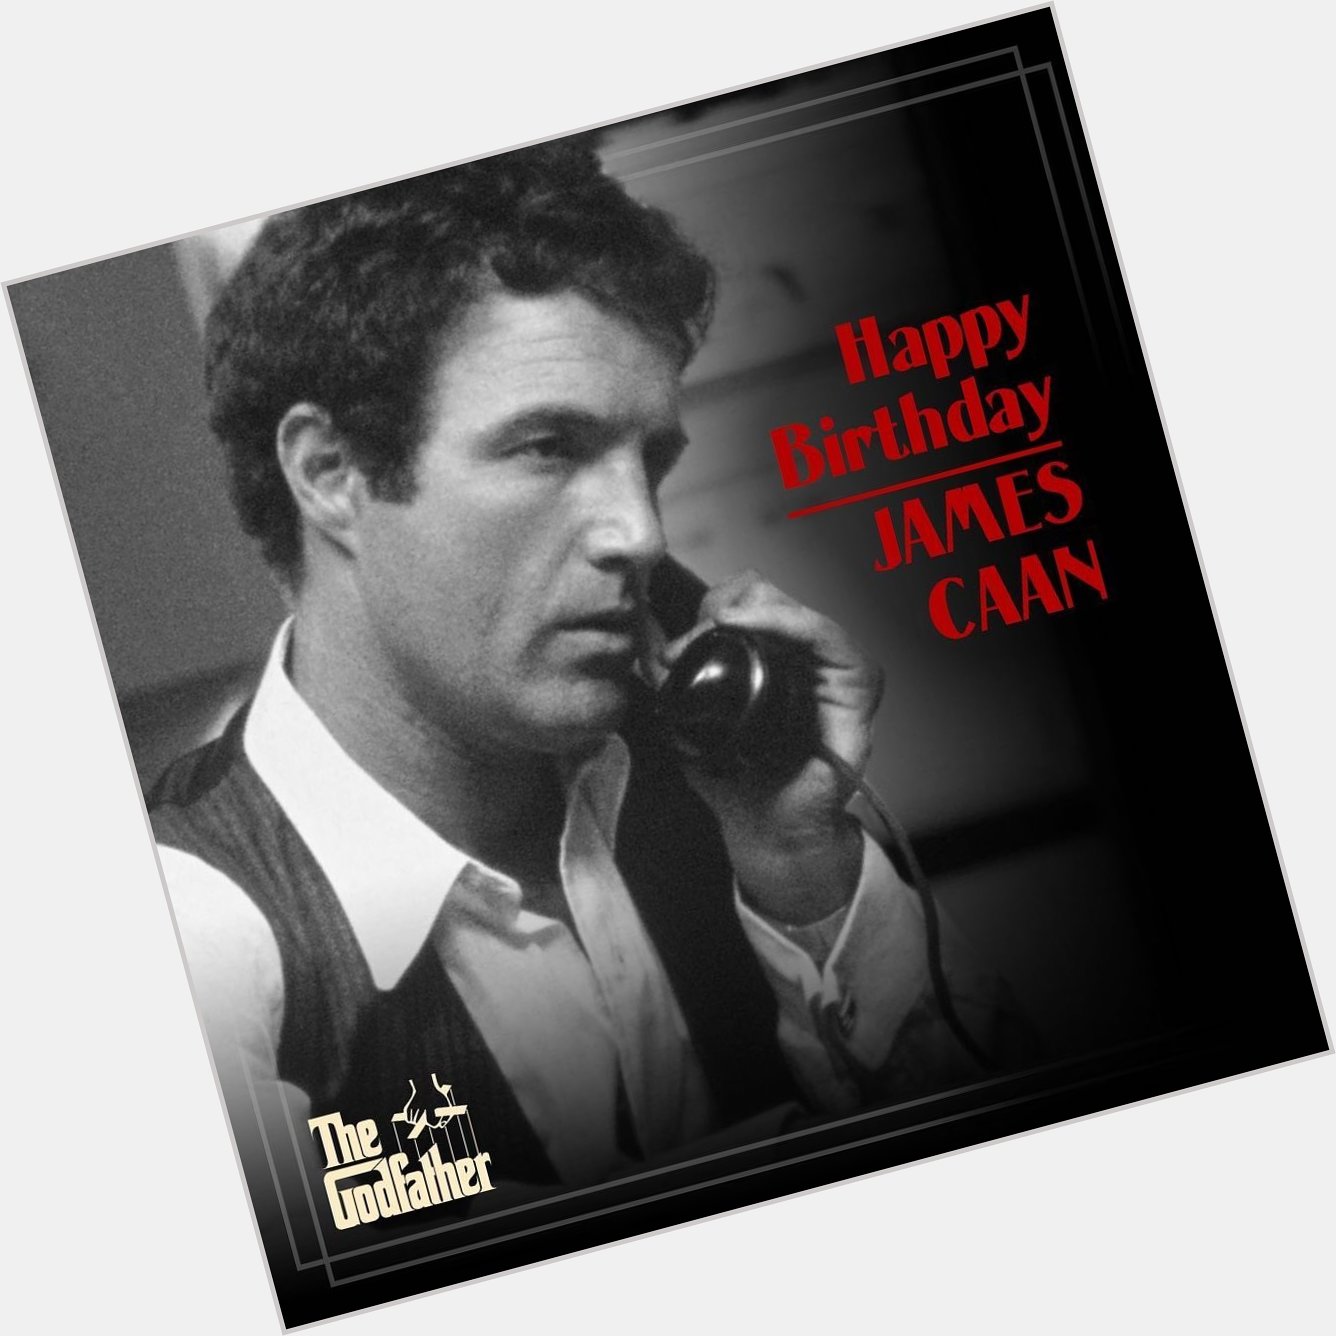 Best film ever and greatest actor happy birthday JAMES CAAN 